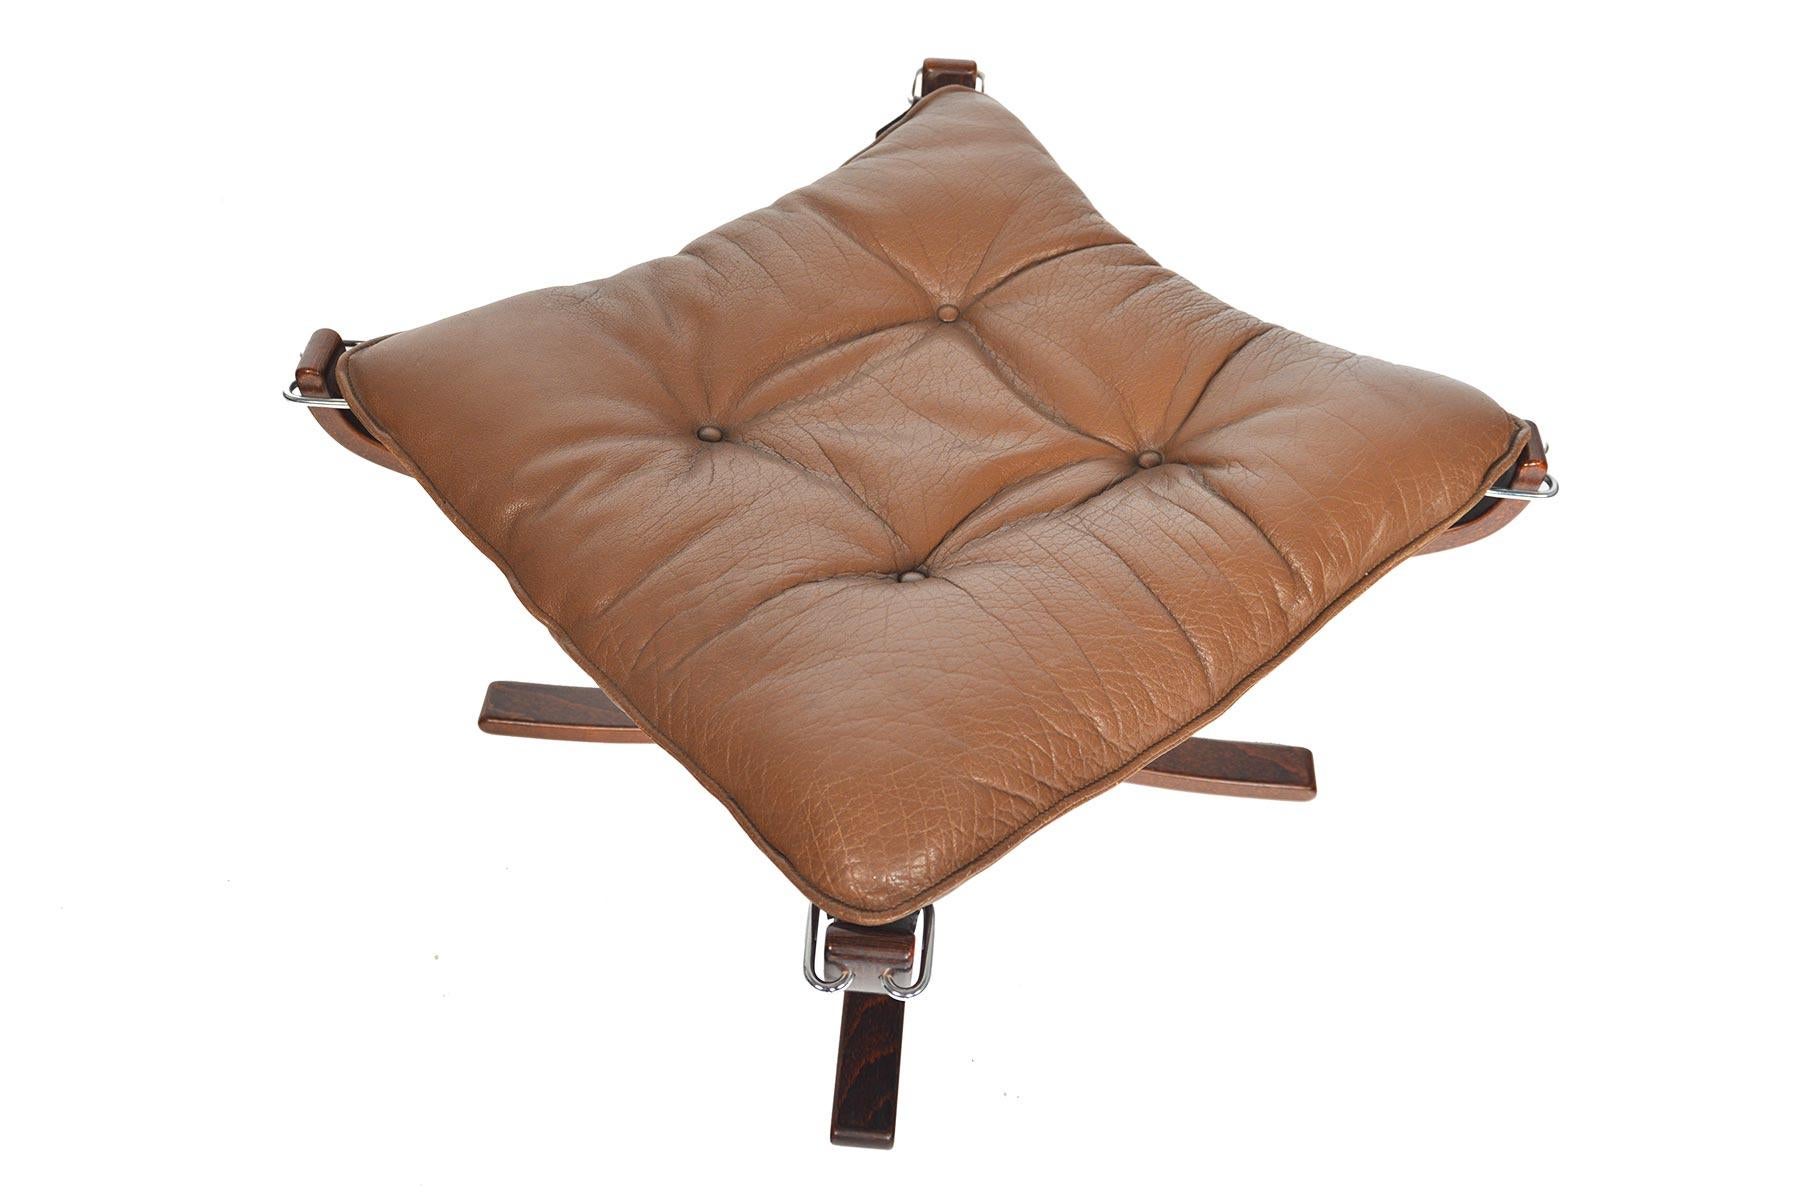 This rare Norwegian modern Falcon chair ottoman was designed by Sigurd Ressell for Vatne in the early 1970s. The loose cushion is covered in original chestnut toned, patinated leather and held in a canvas sling. In excellent original condition.

